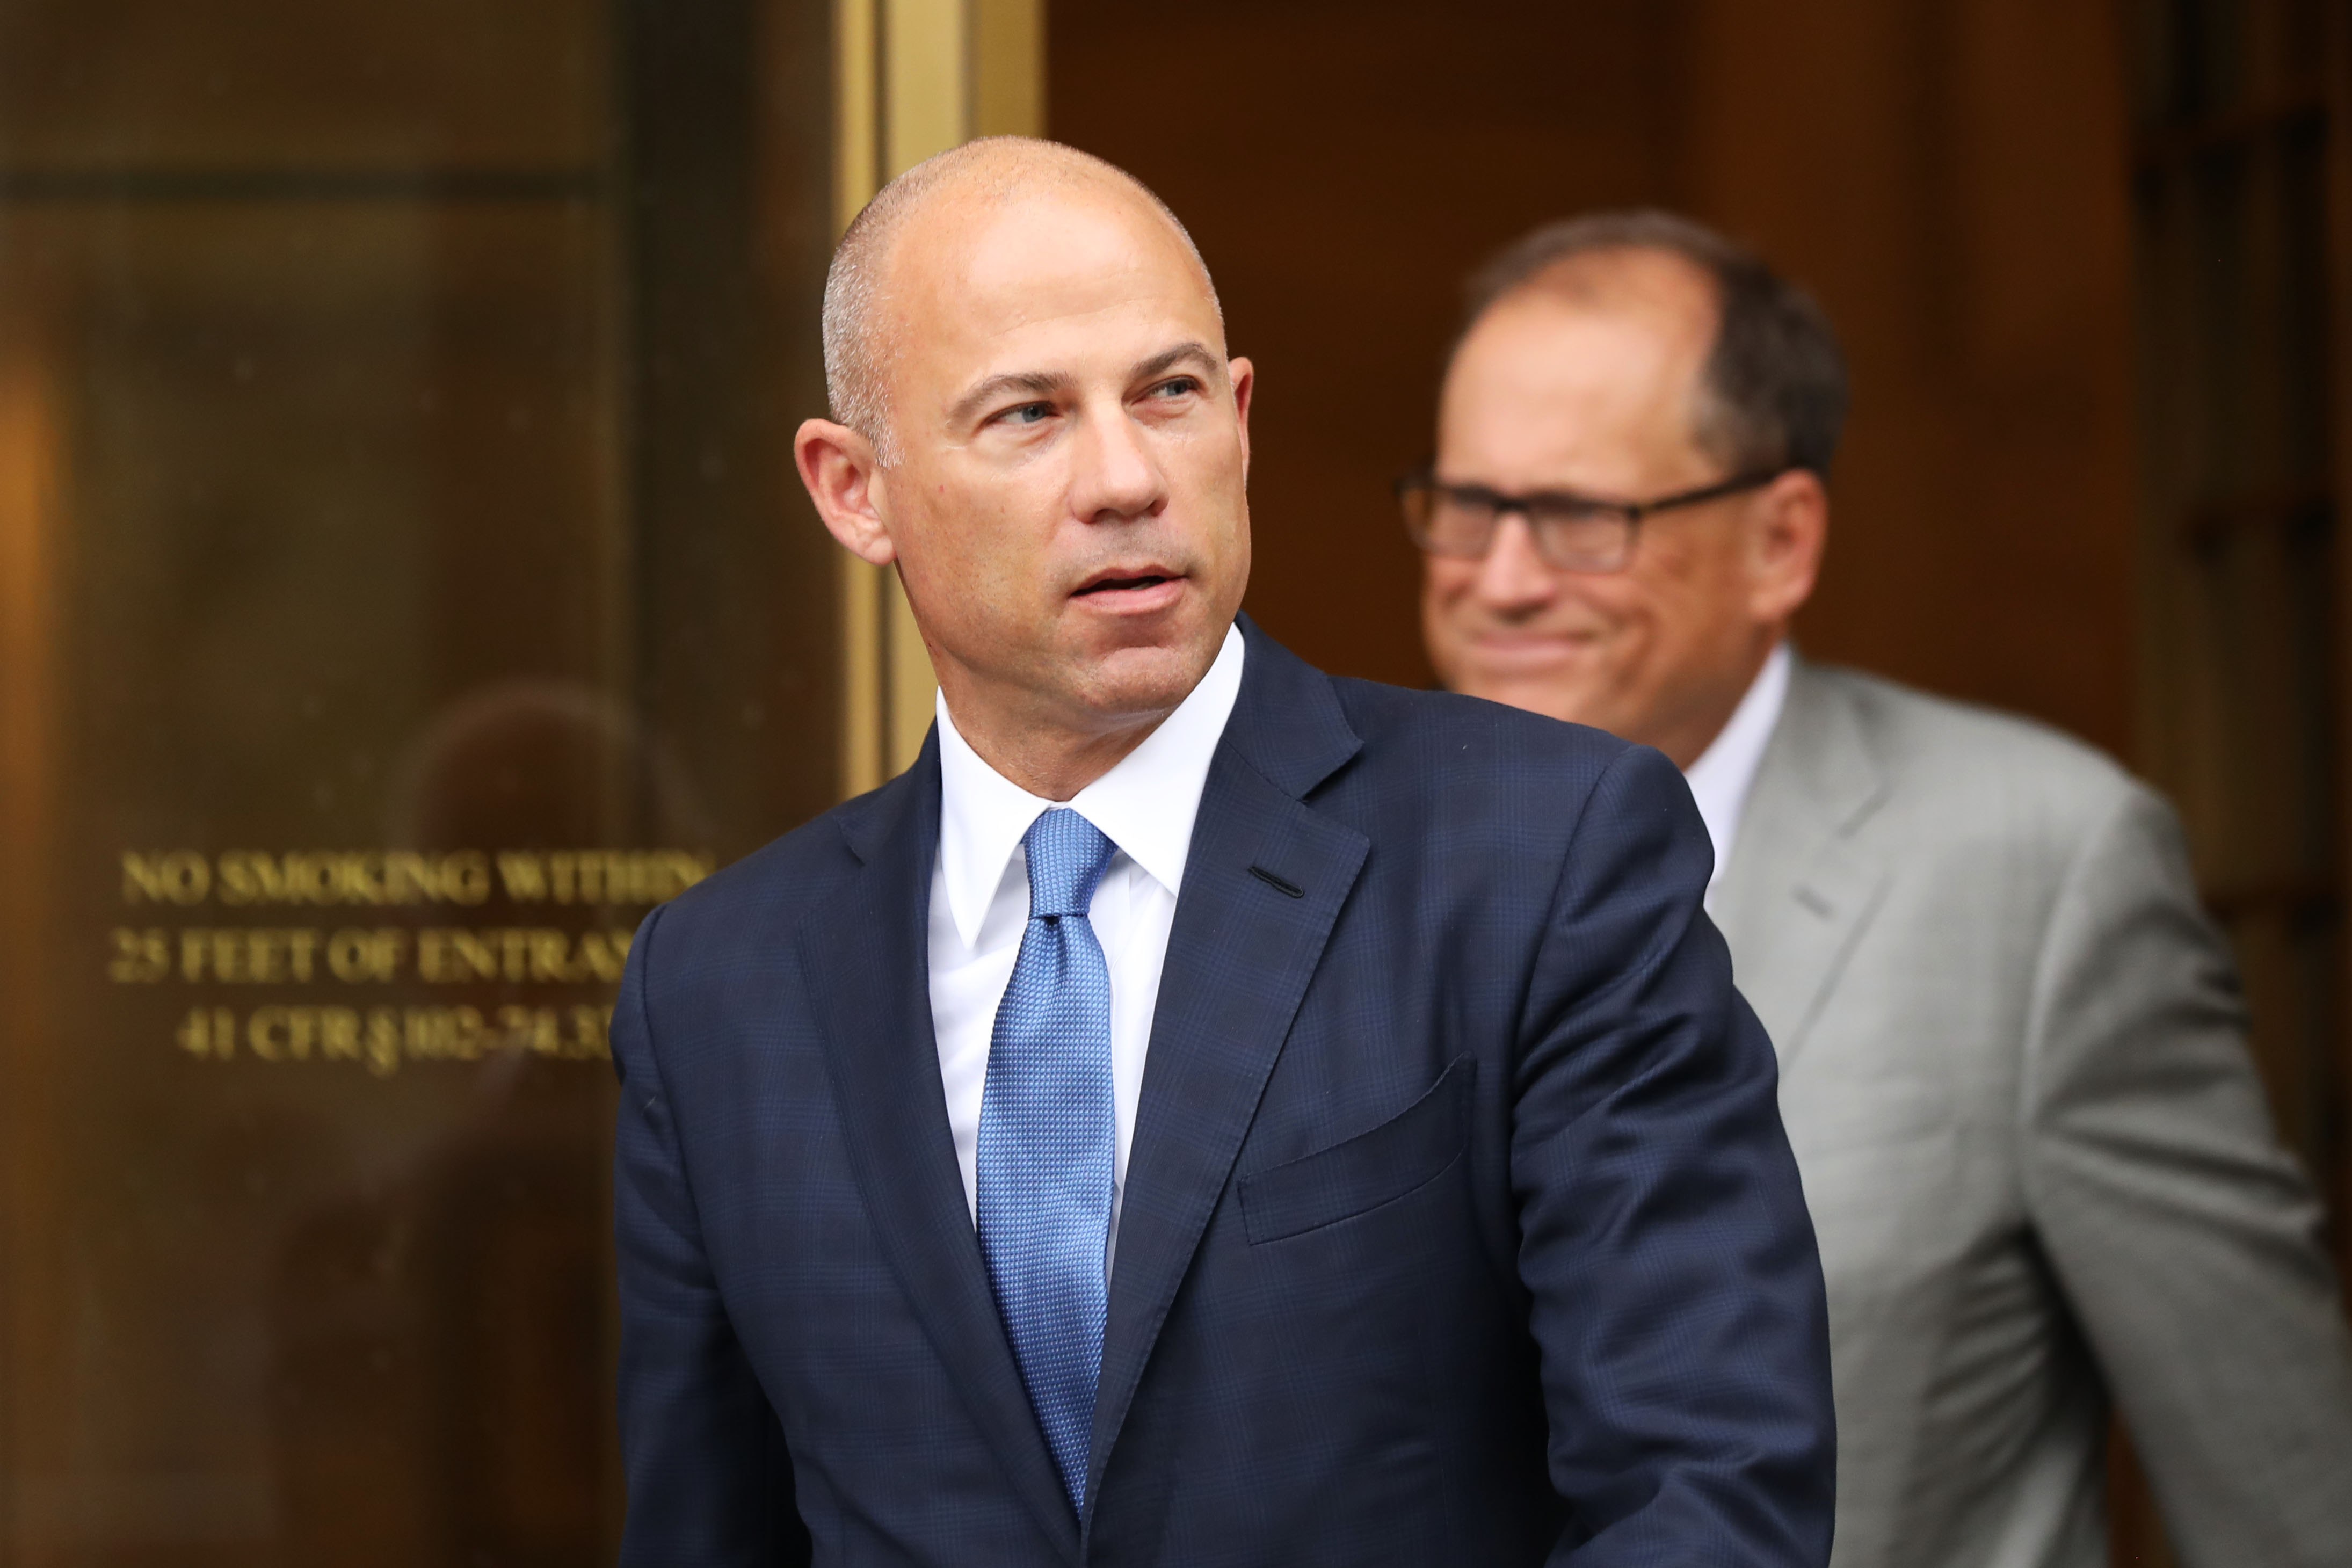 Celebrity attorney Michael Avenatti walks out of a New York court house on July 23, 2019 in New York City.